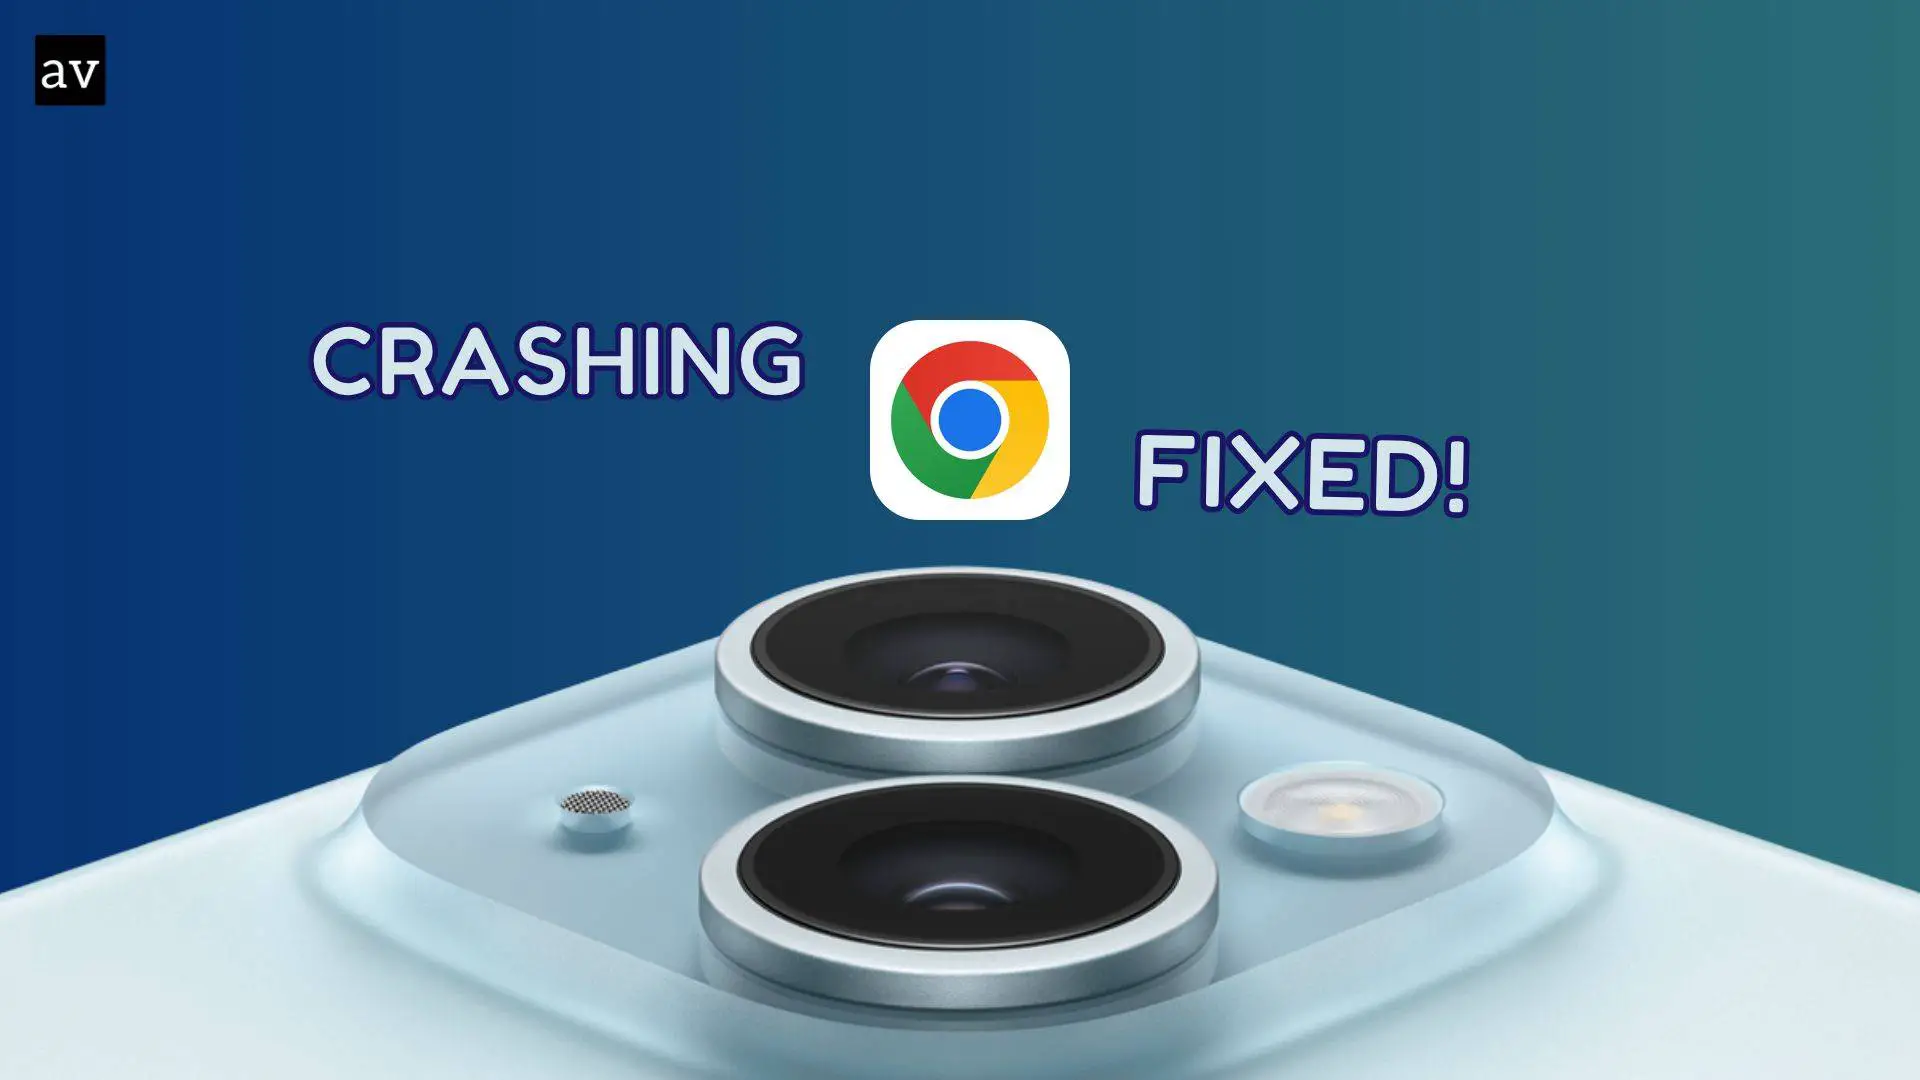 Google Chrome and its fix of crashing by AppleVeteran